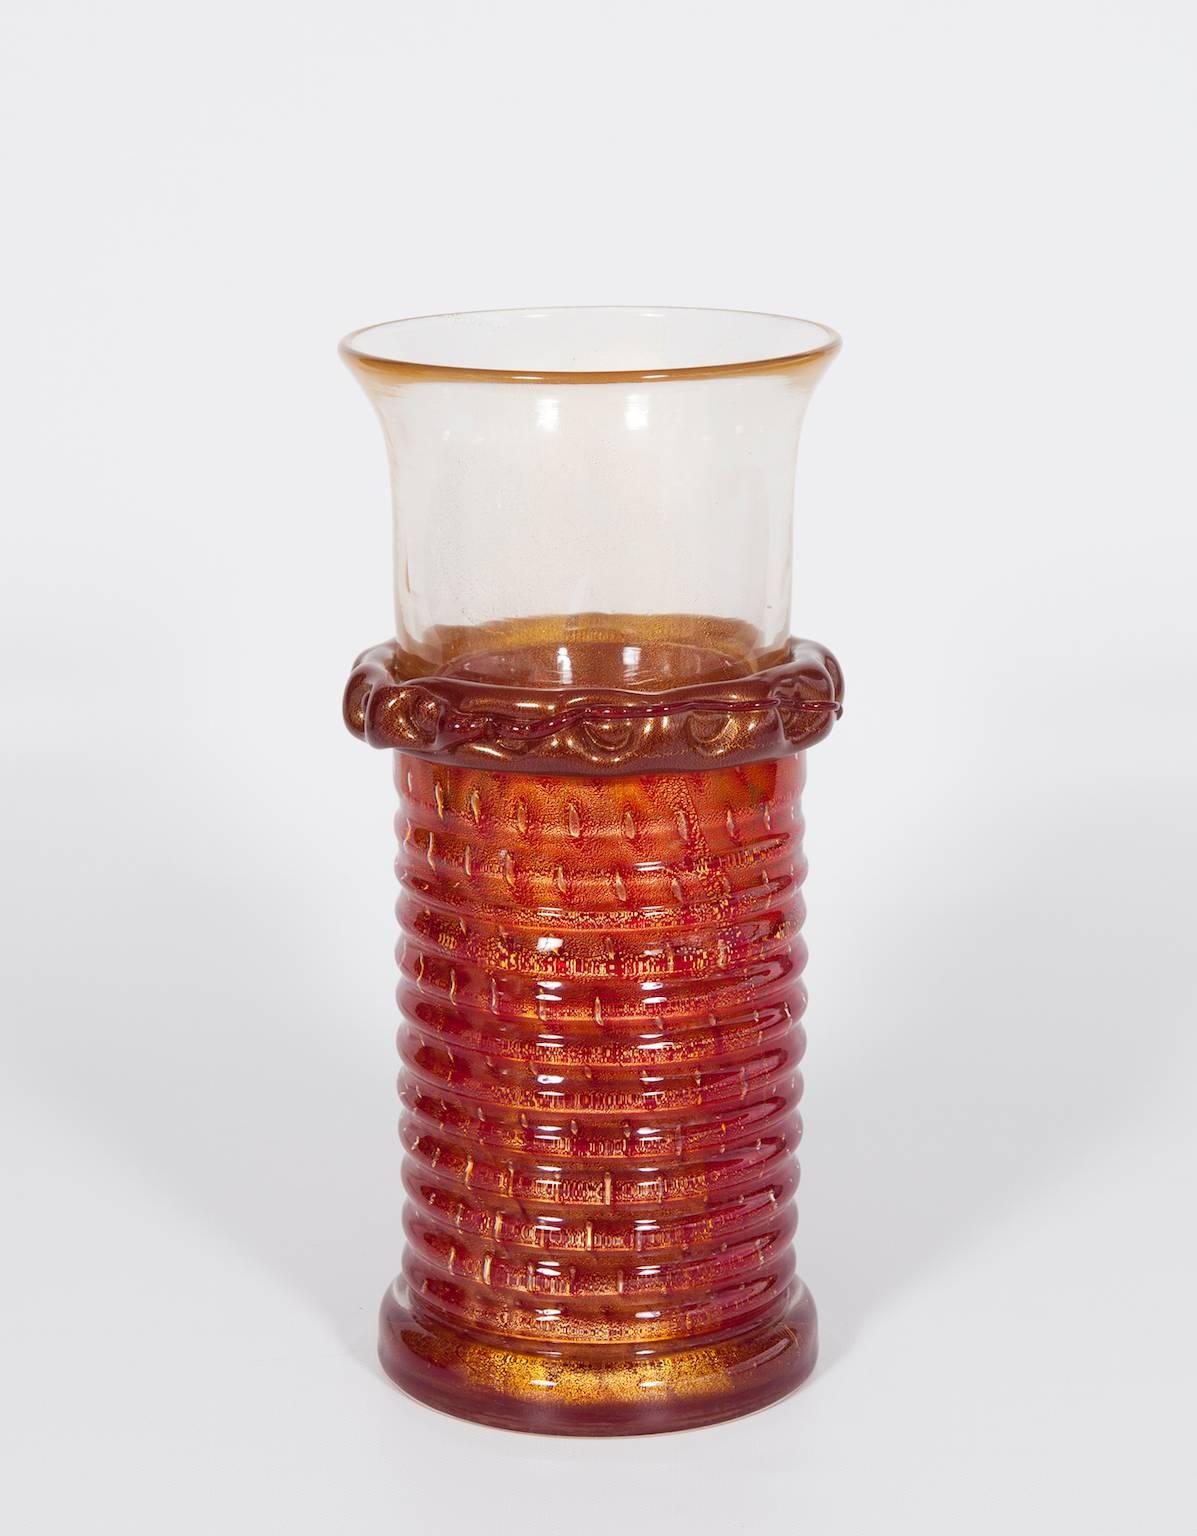 Italian Venetian Murano Glass Vase Attributed to Barovier & Toso circa 1970s
Amazing and sophisticated Italian Venetian Murano glass vase in gold and red color with a beautiful gold tape in the middle that divides the red part with gold bubbles